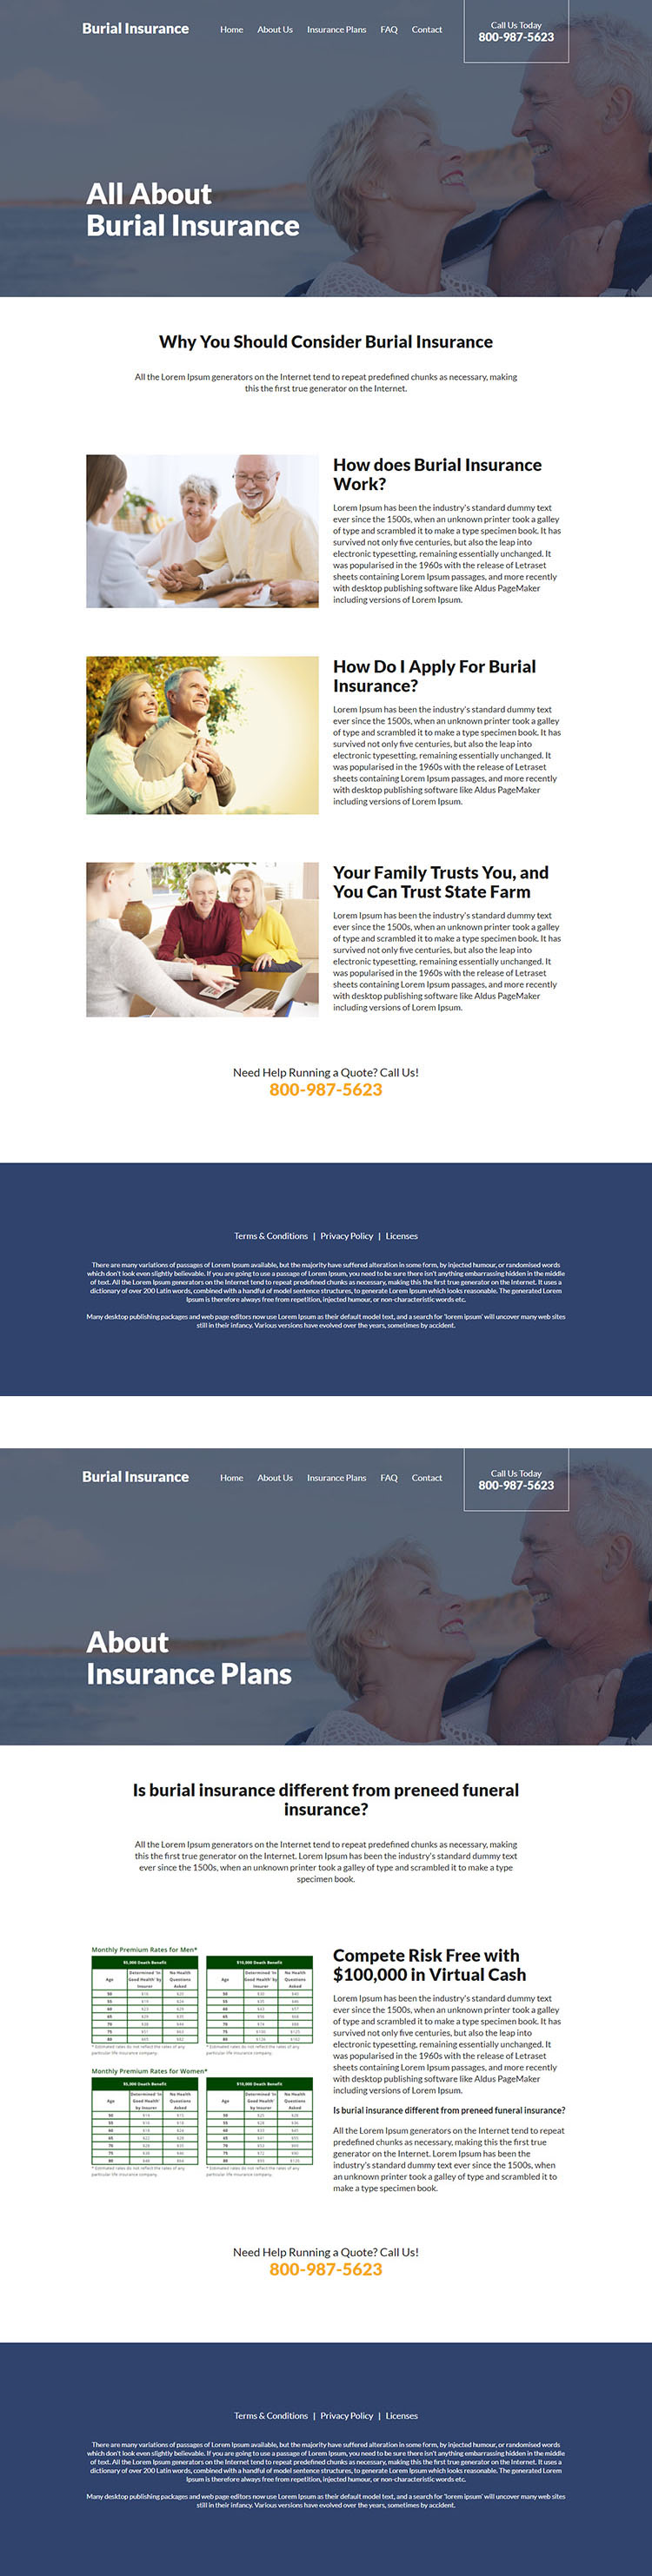 professional burial insurance free quotes responsive website design